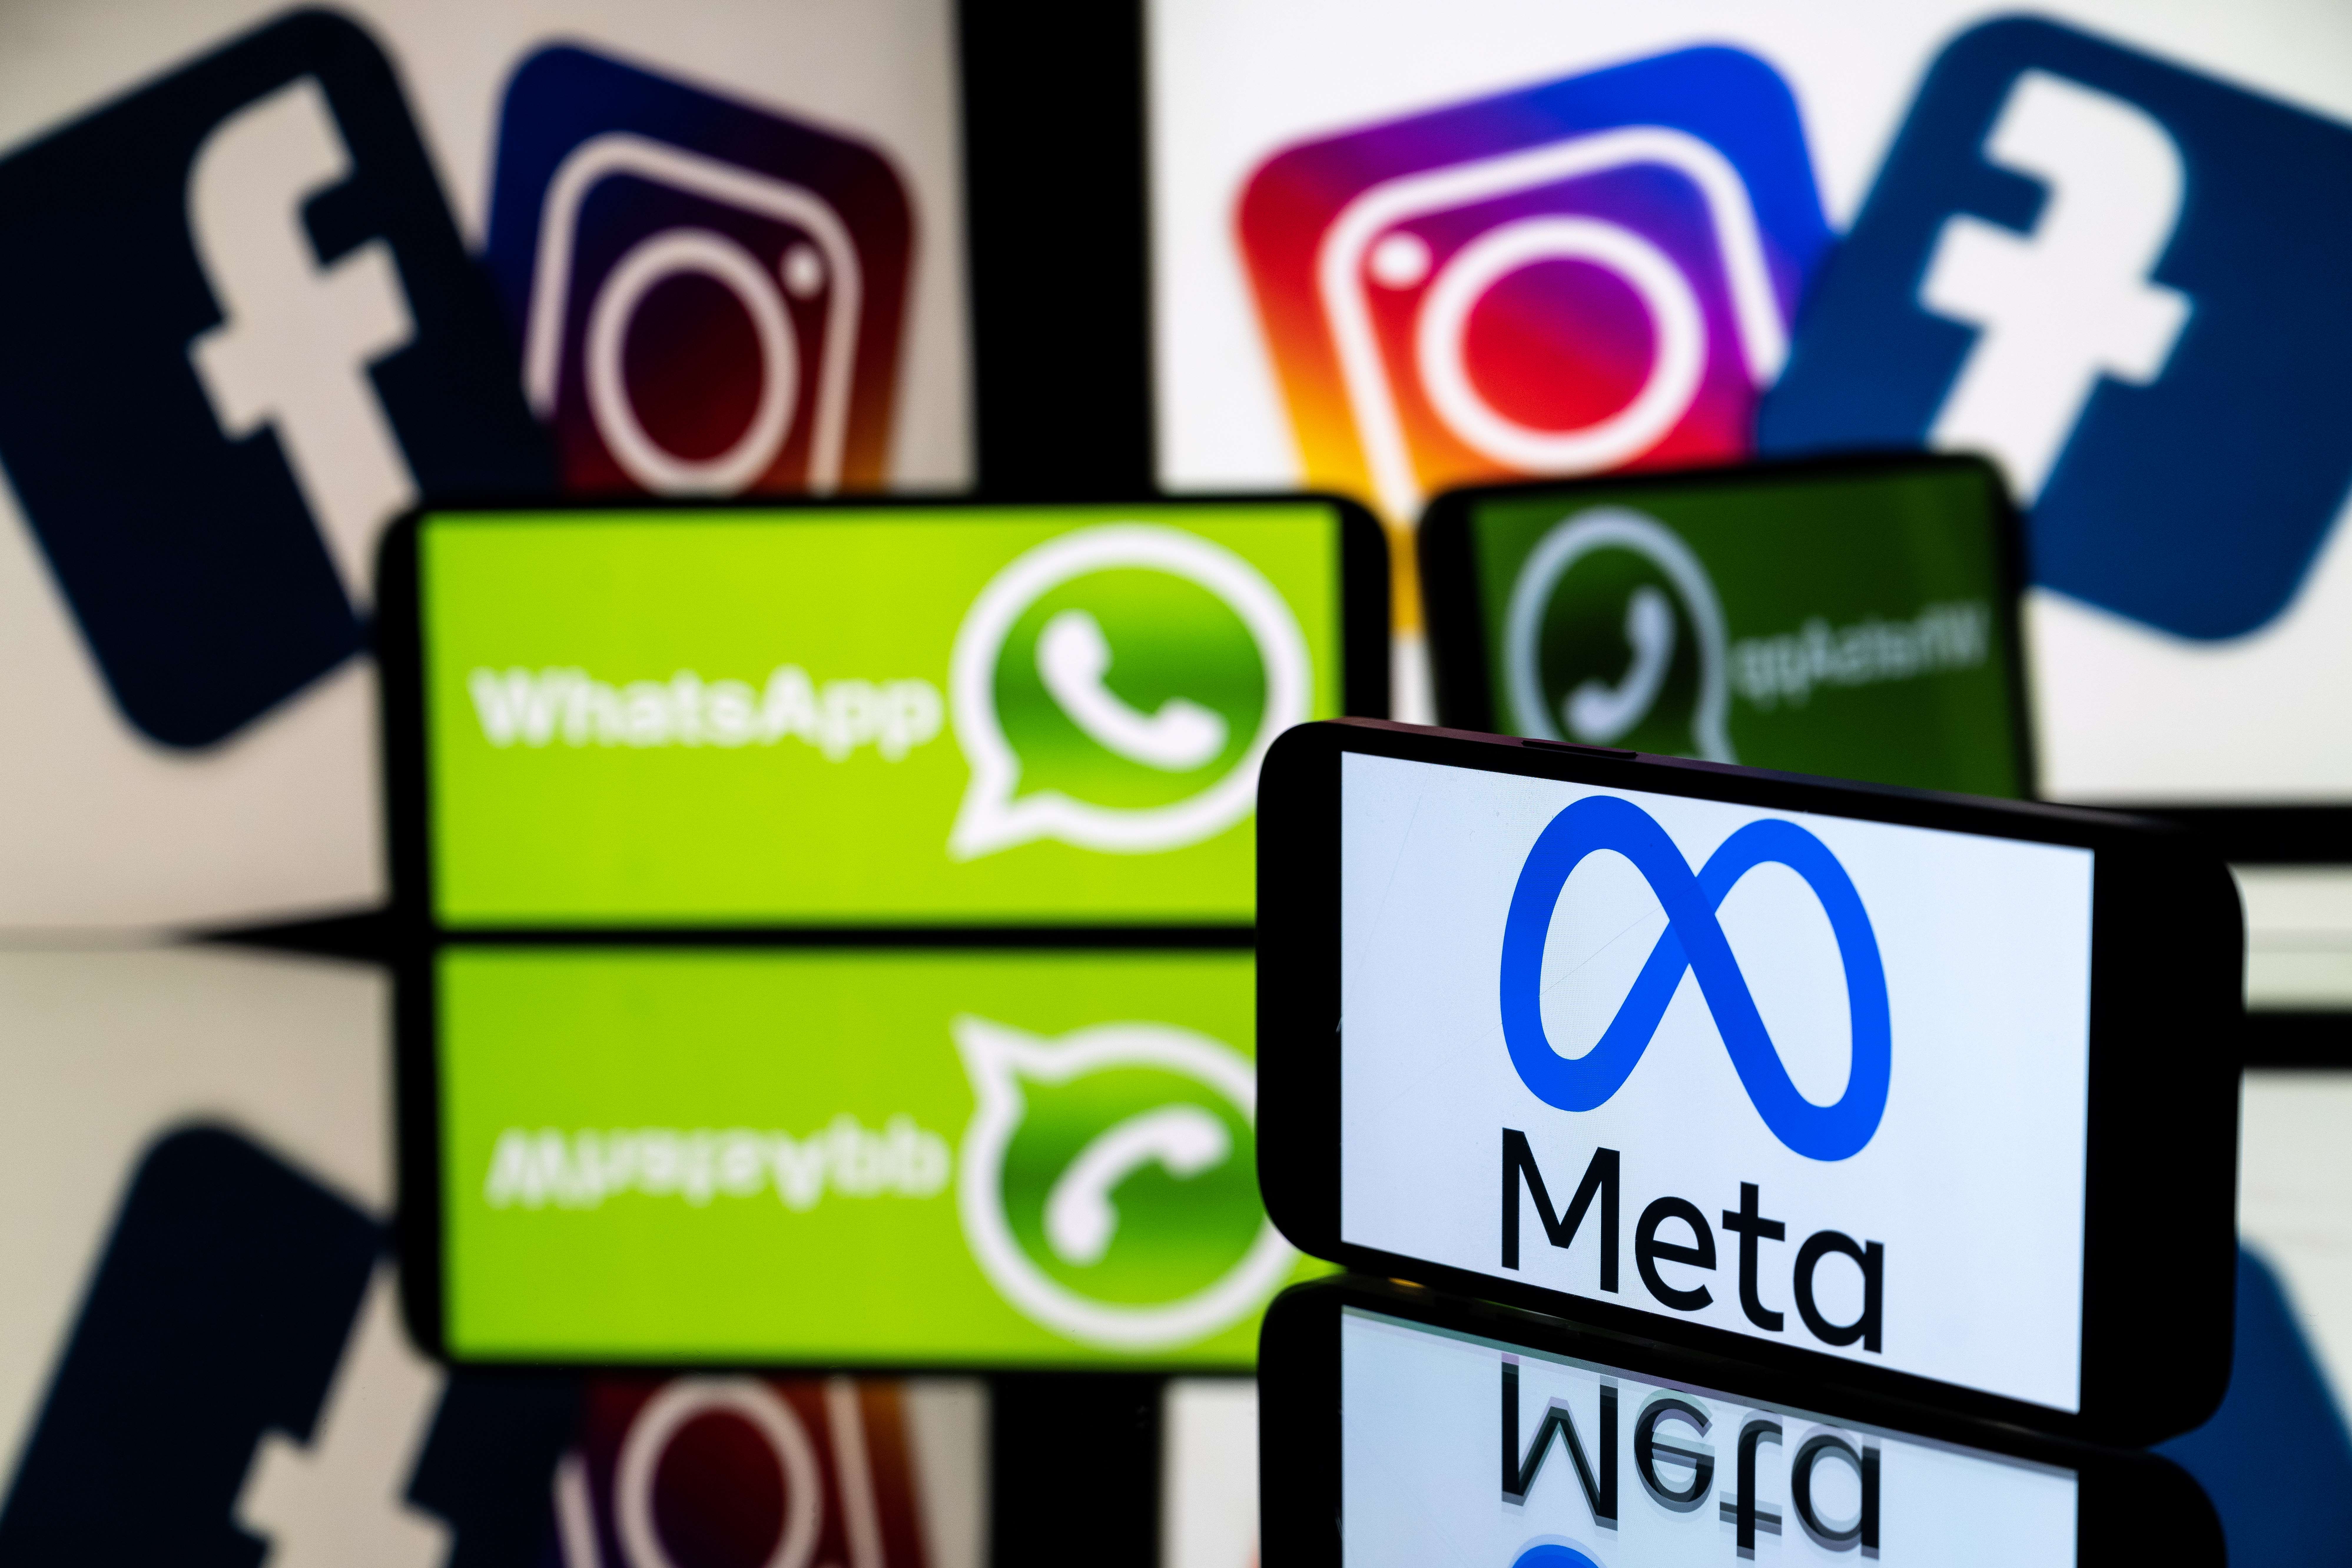 This picture taken on January 12, 2023 in Toulouse, southwestern France shows a smartphone and a computer screen displaying the logos of the Instagram, Facebook, WhatsApp and their parent company Meta. (Photo by Lionel BONAVENTURE / AFP)